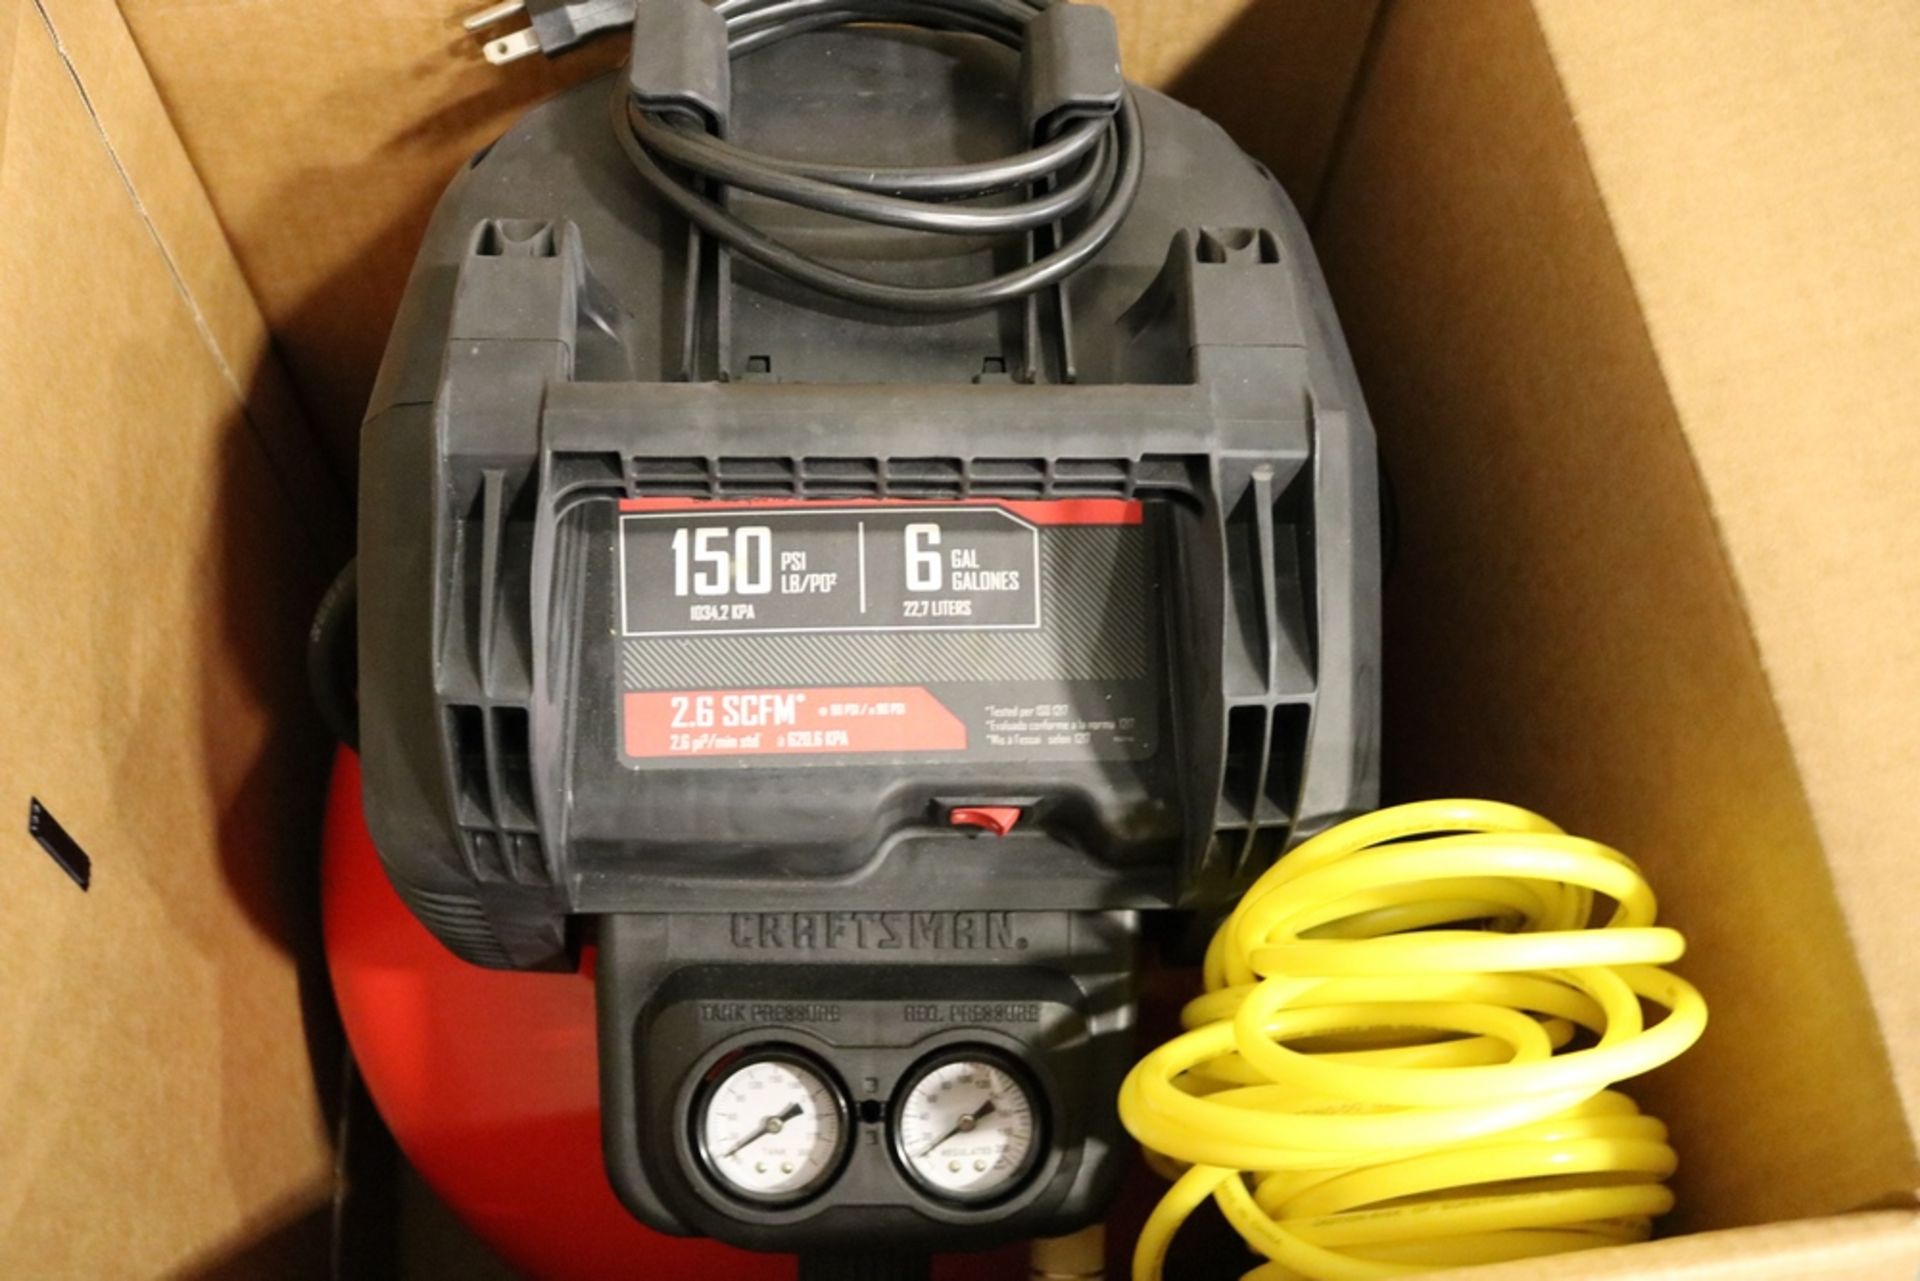 Like New Craftsman 6 Gallon Air Compressor and Coleman Powermate 15 Gallon Portable Air Compressor - Image 3 of 5